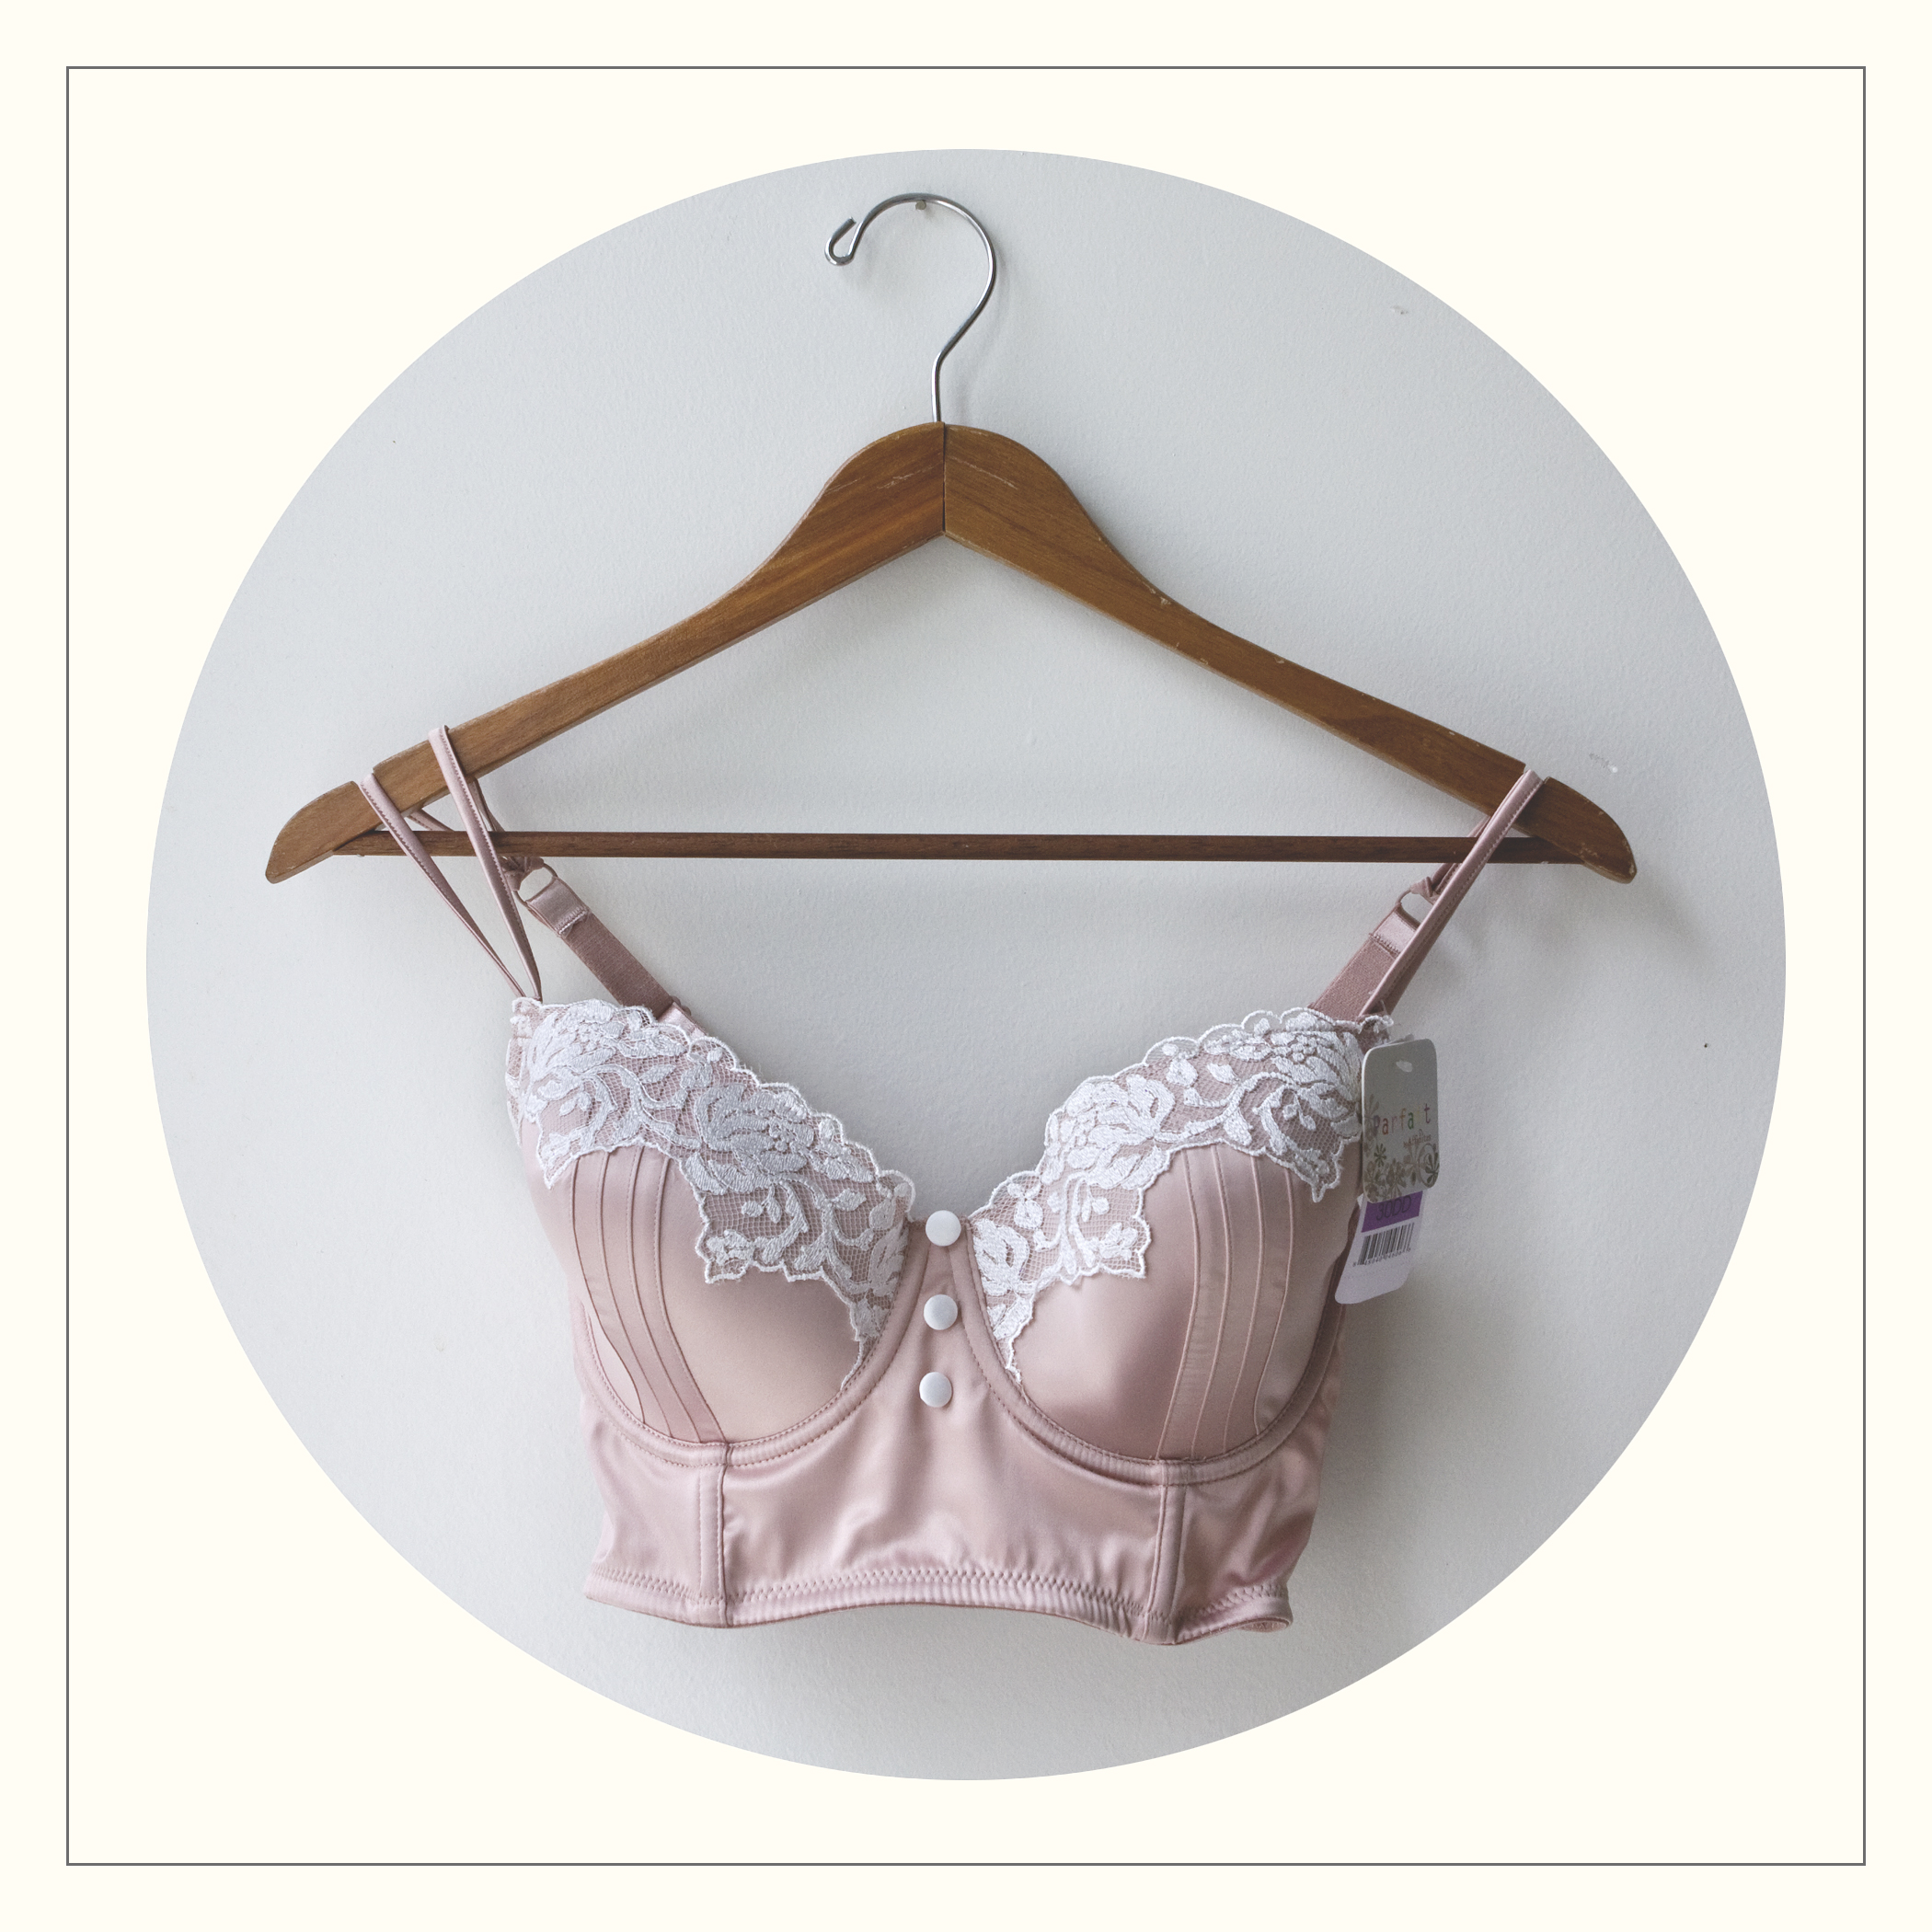 Bra Identification] Bra from Facebook ad, does anyone recognize the  brand/style? : r/ABraThatFits